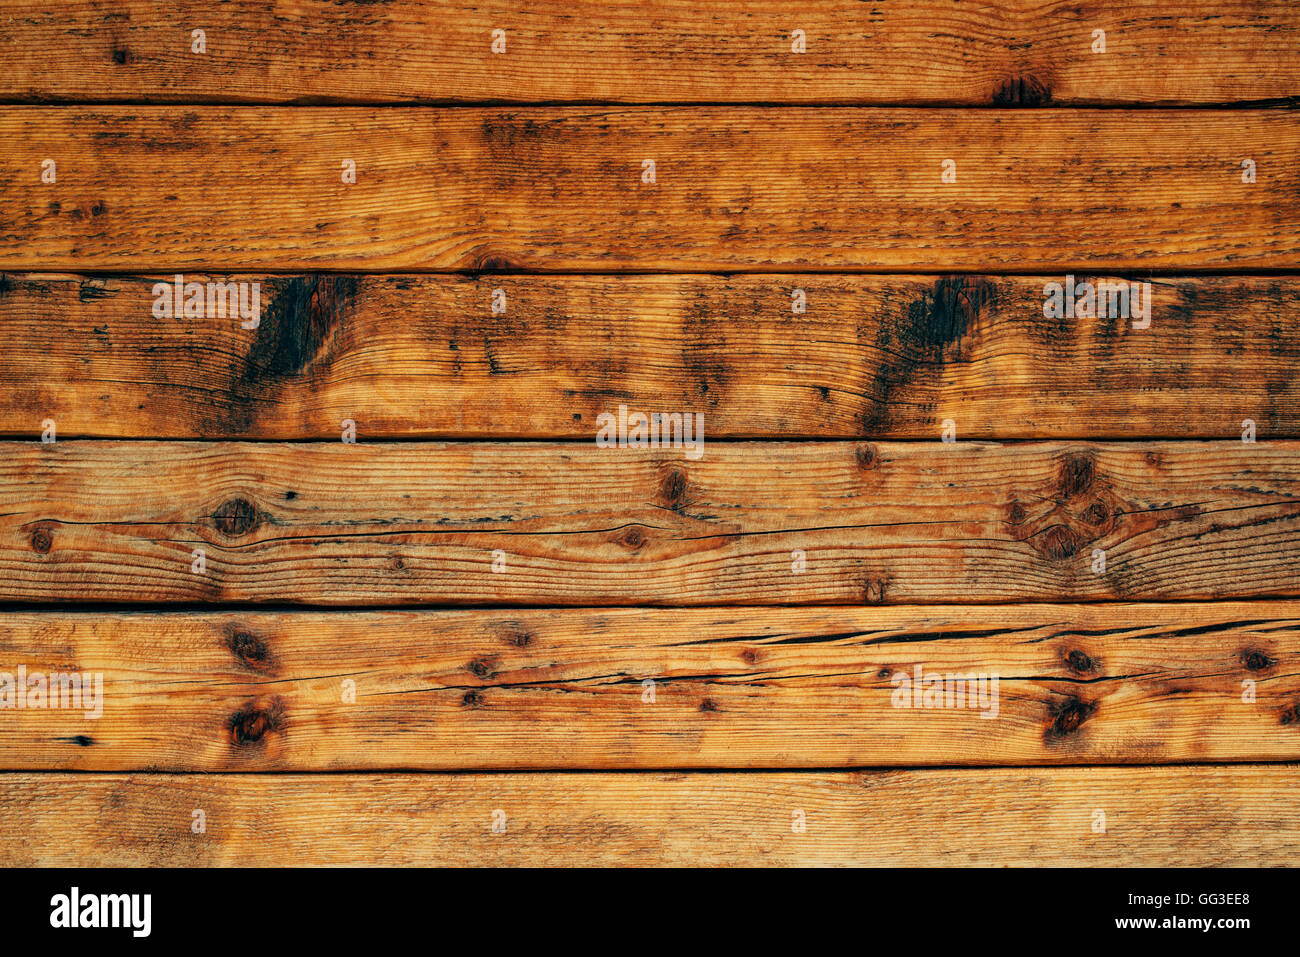 Rustic wooden planks texture as natural background Stock Photo